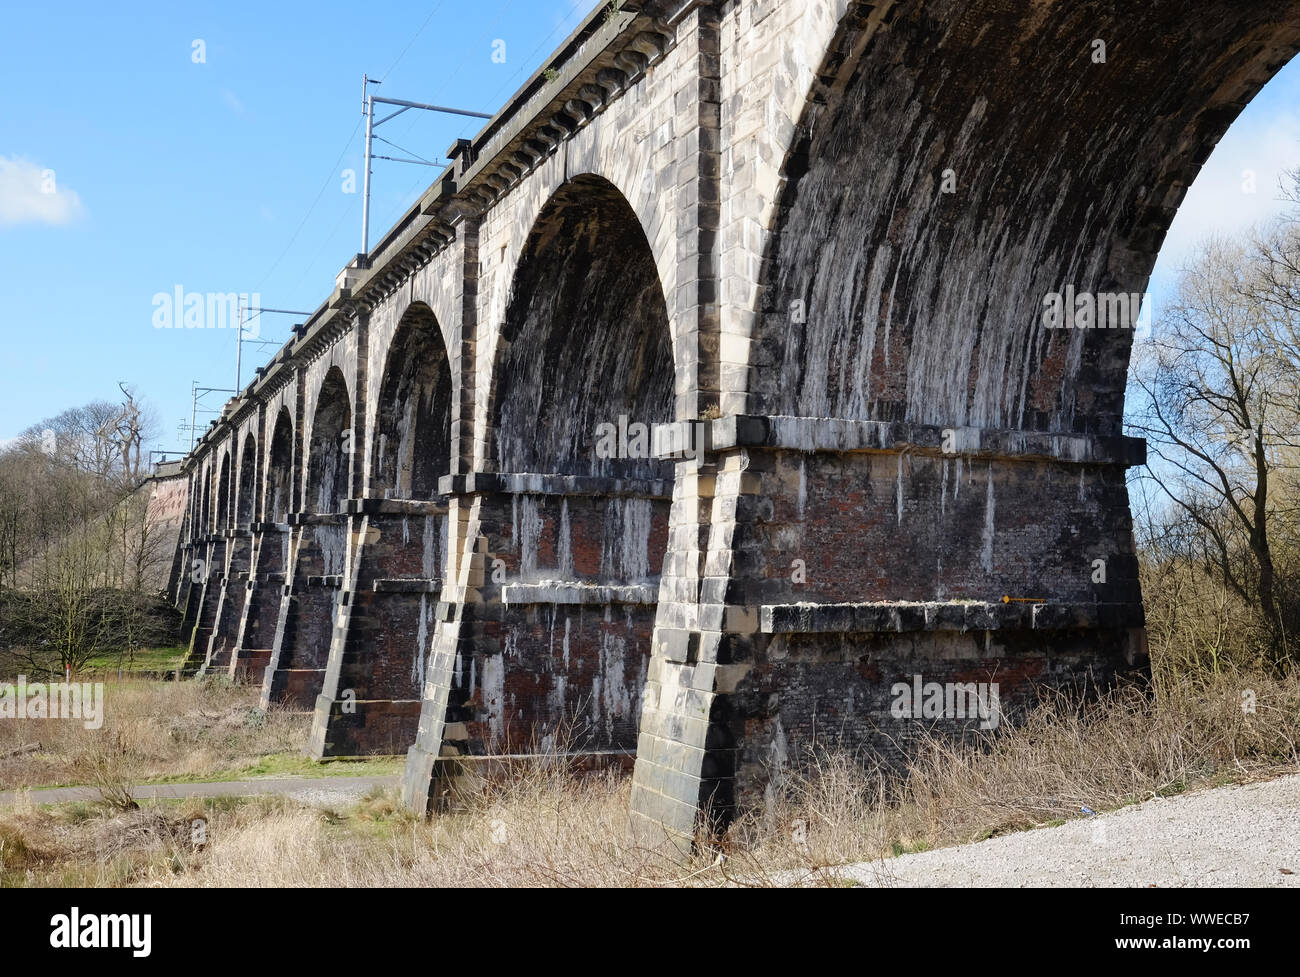 Sankey Viaduct, the world's oldest railway viaduct, on the Liverpool and Manchester Railway, which opened in 1830. Stock Photo